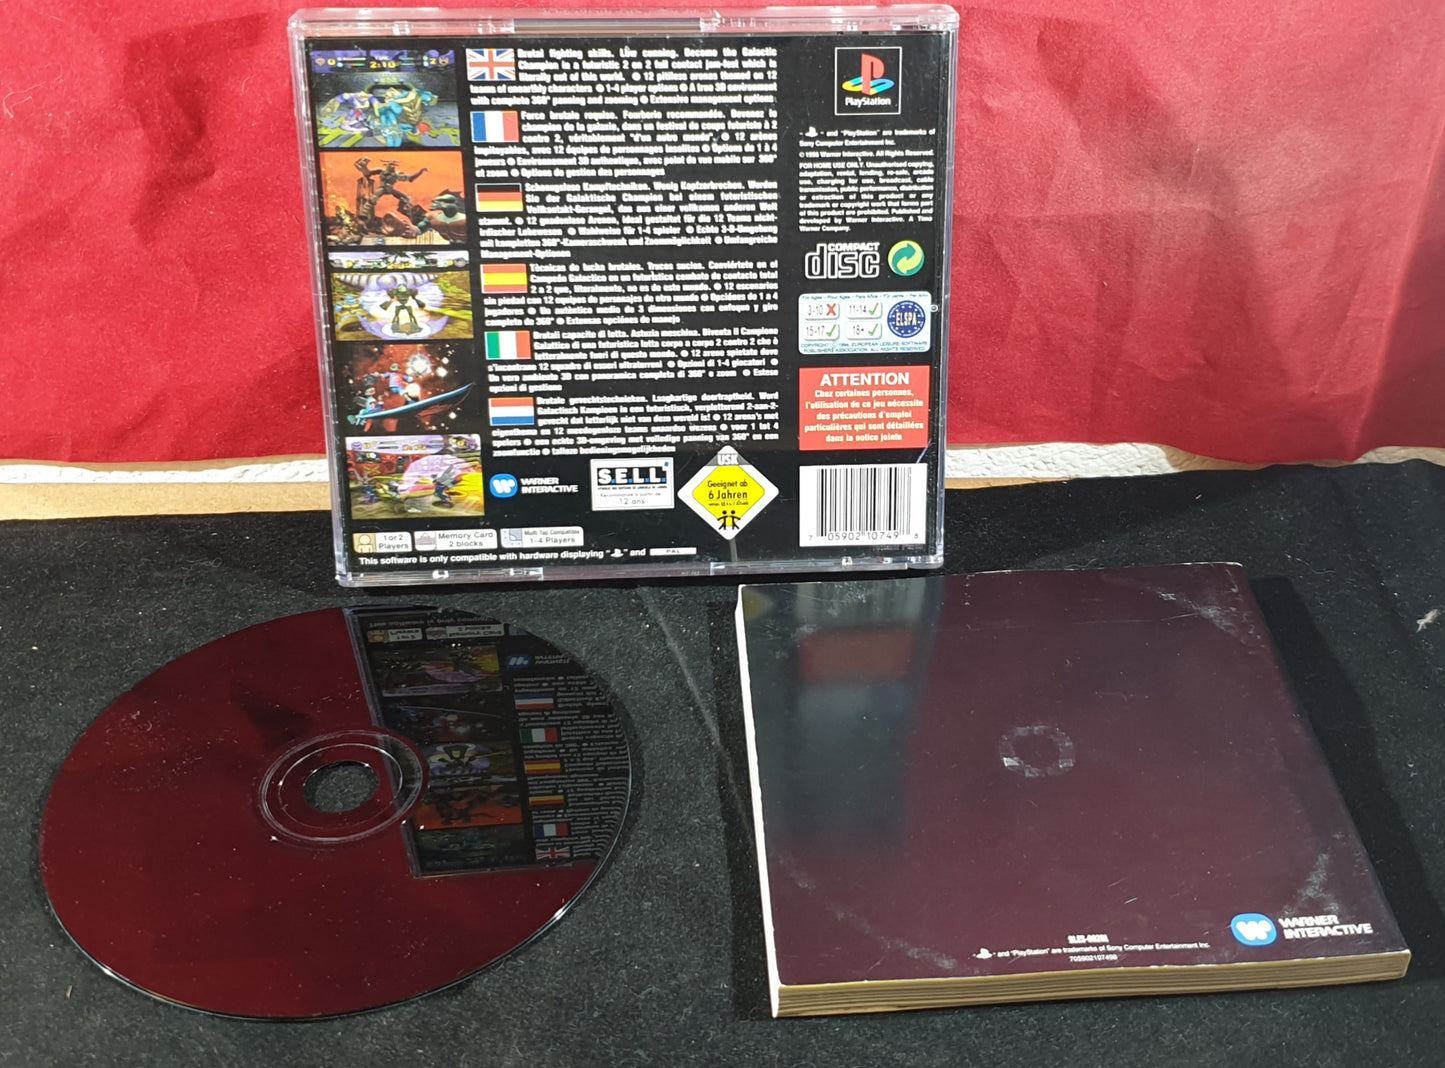 Pitball with Manual Sony Playstation 1 (PS1) Game